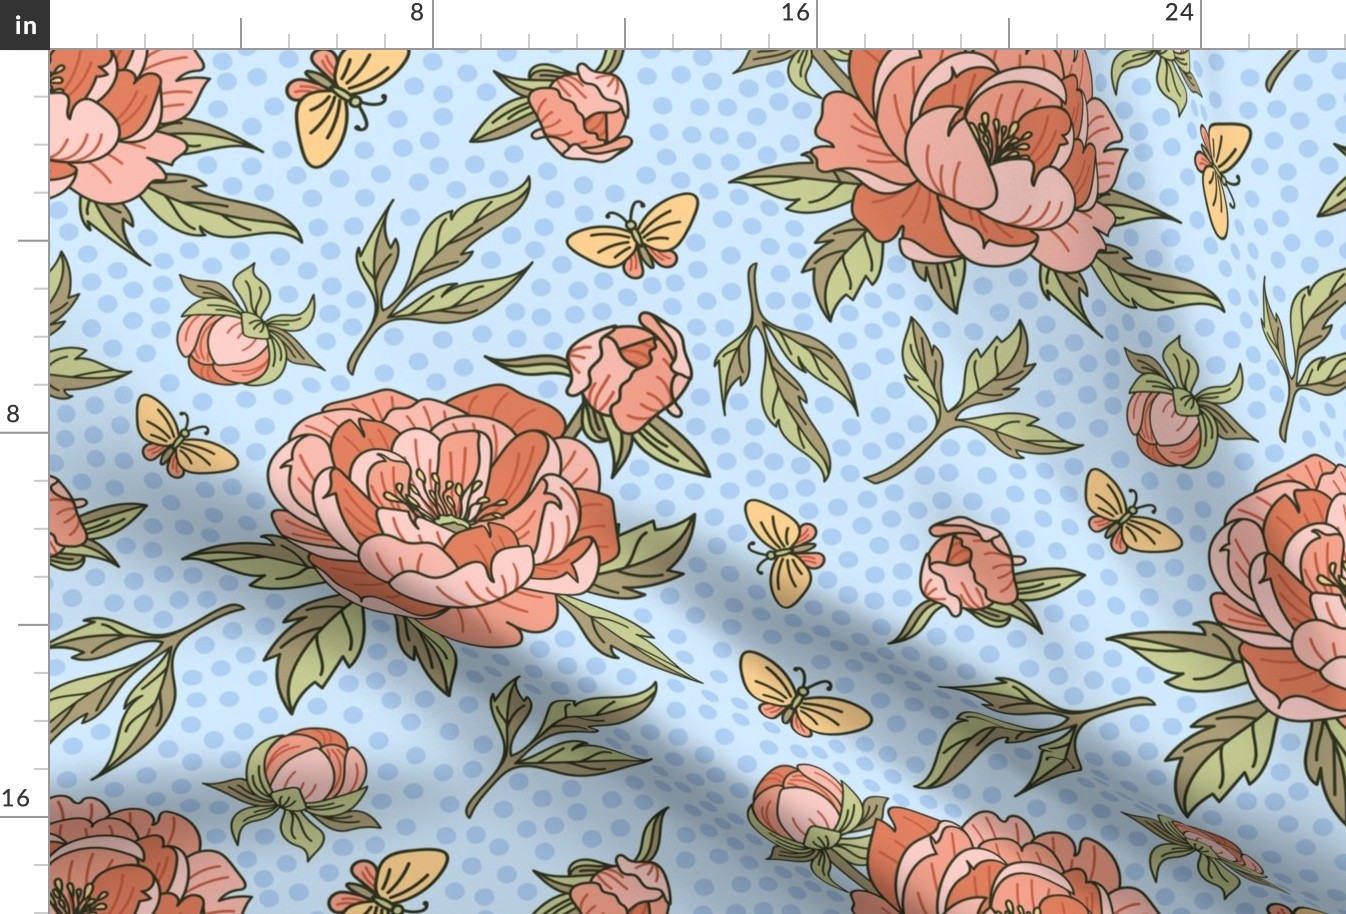 Peony Red and Butterflies - Polka Dots on Light Blue BG - Floral Collection